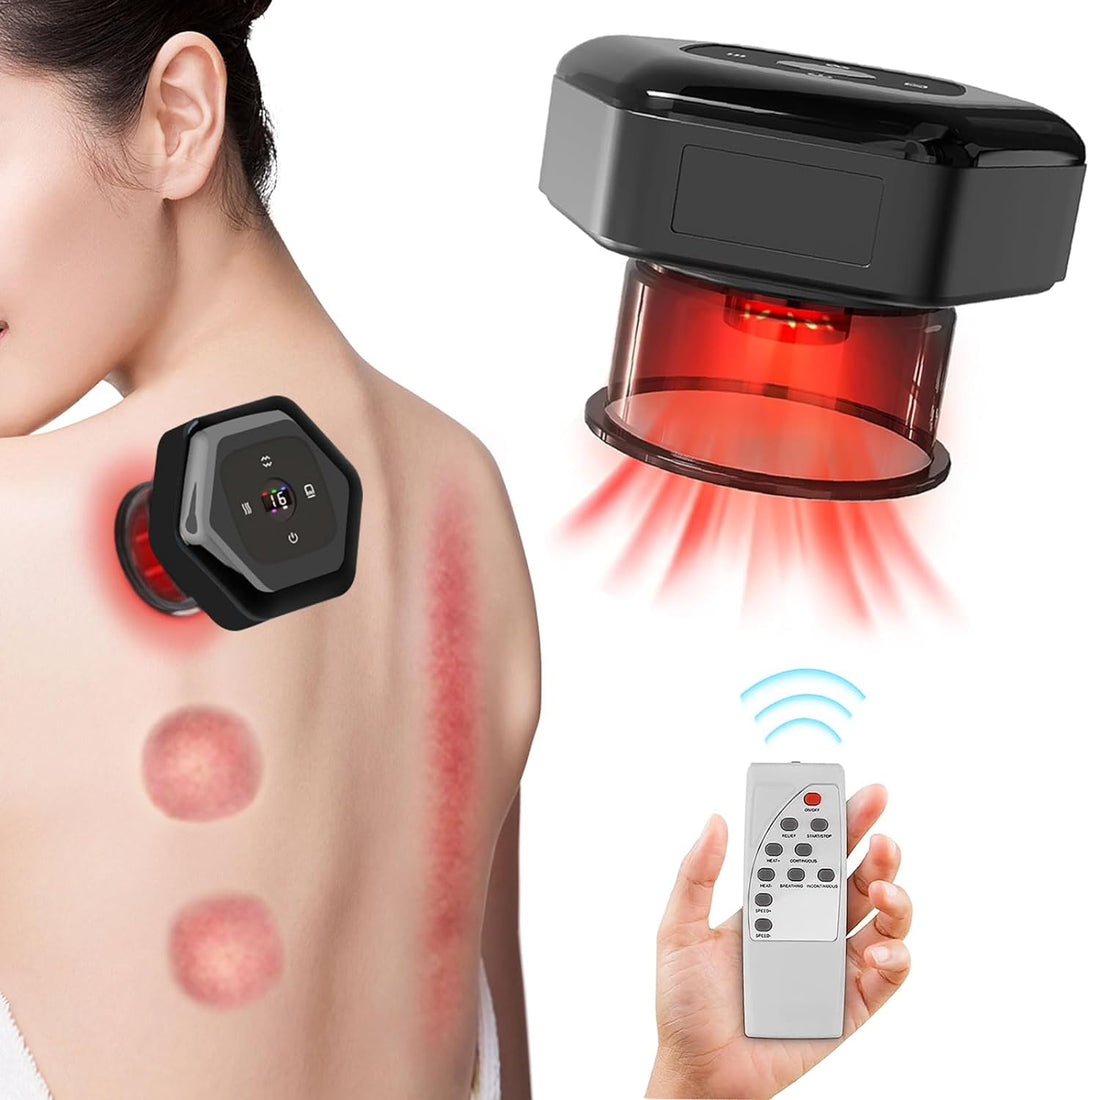 Smart Cupping Therapy Massager 4-in-1 Electric Cupping Therapy Set - Remote Control Cupping Set with Red Light, 3 Mode, 16 Level Temperature and Suction